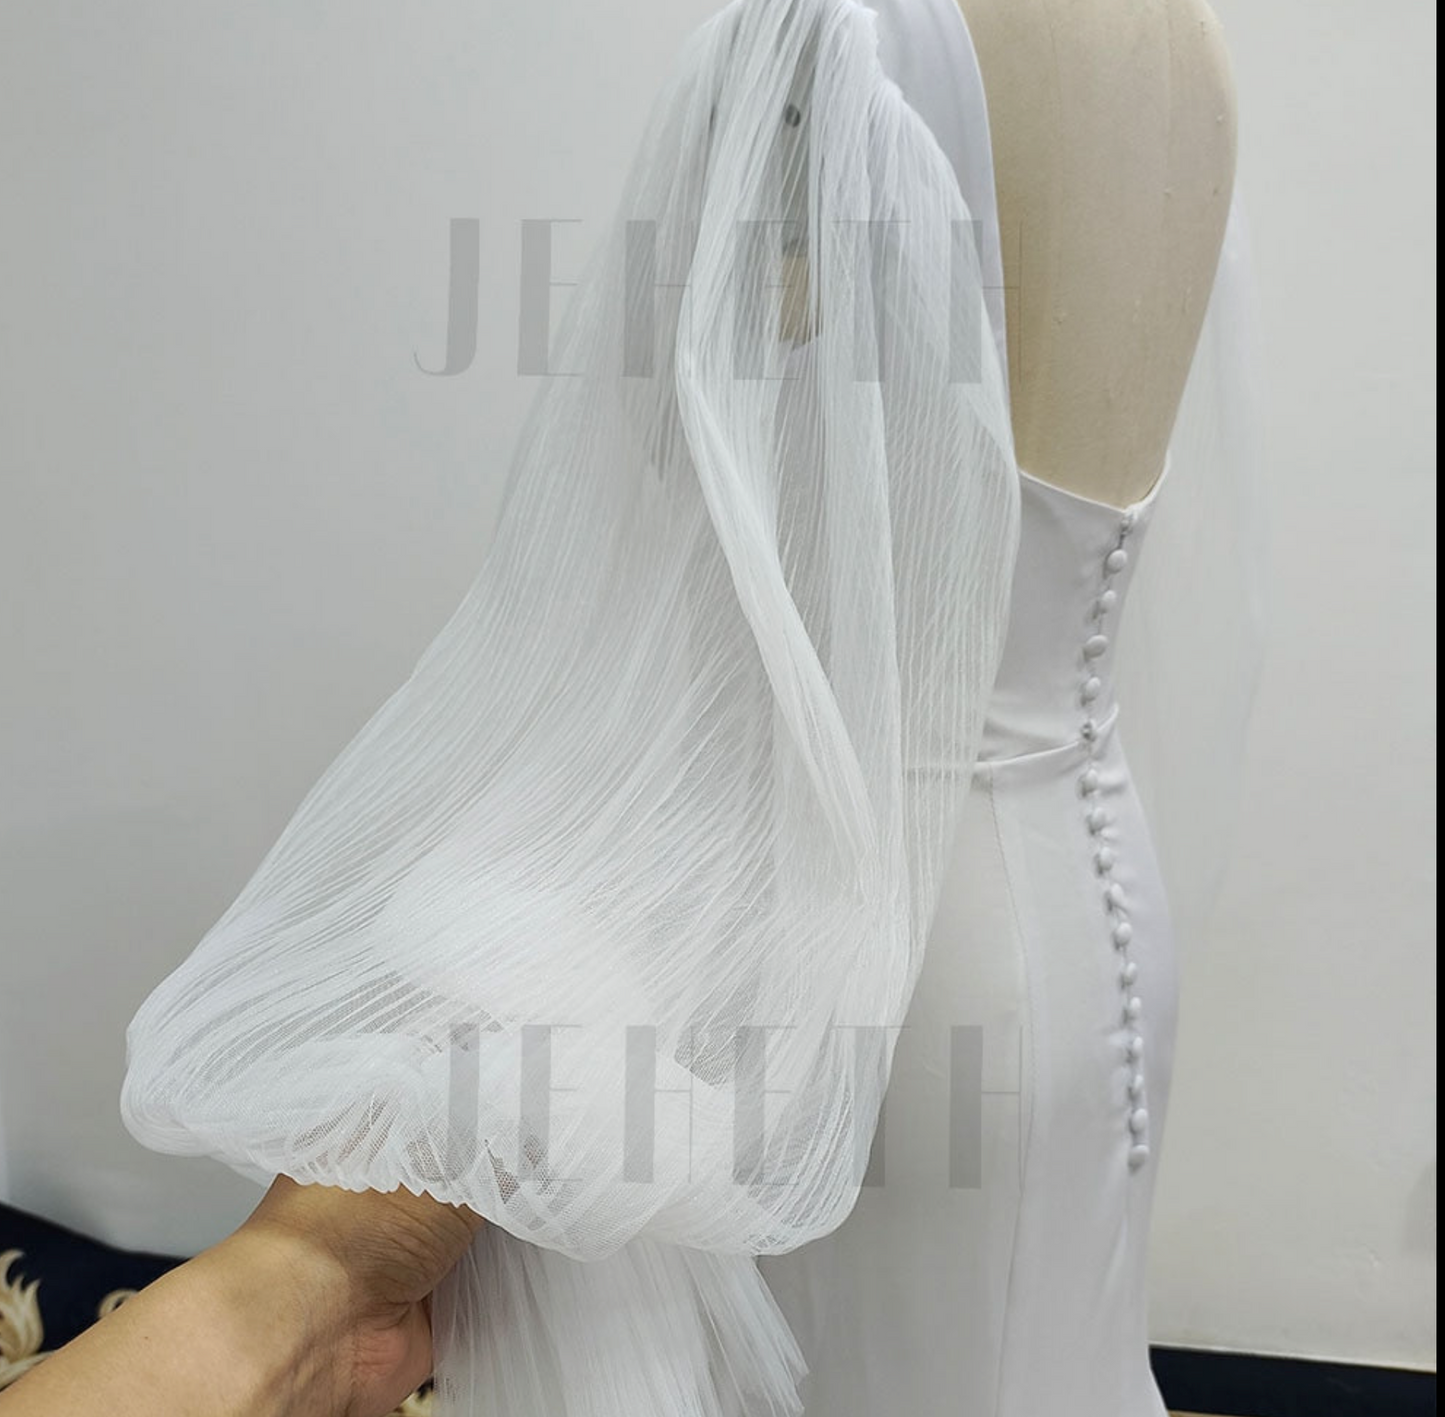 Wedding Veil with Glitter, Sparkling Fluffy Long Onetier Veil with Comb 118 Light Ivory | Bridal Veil Designs